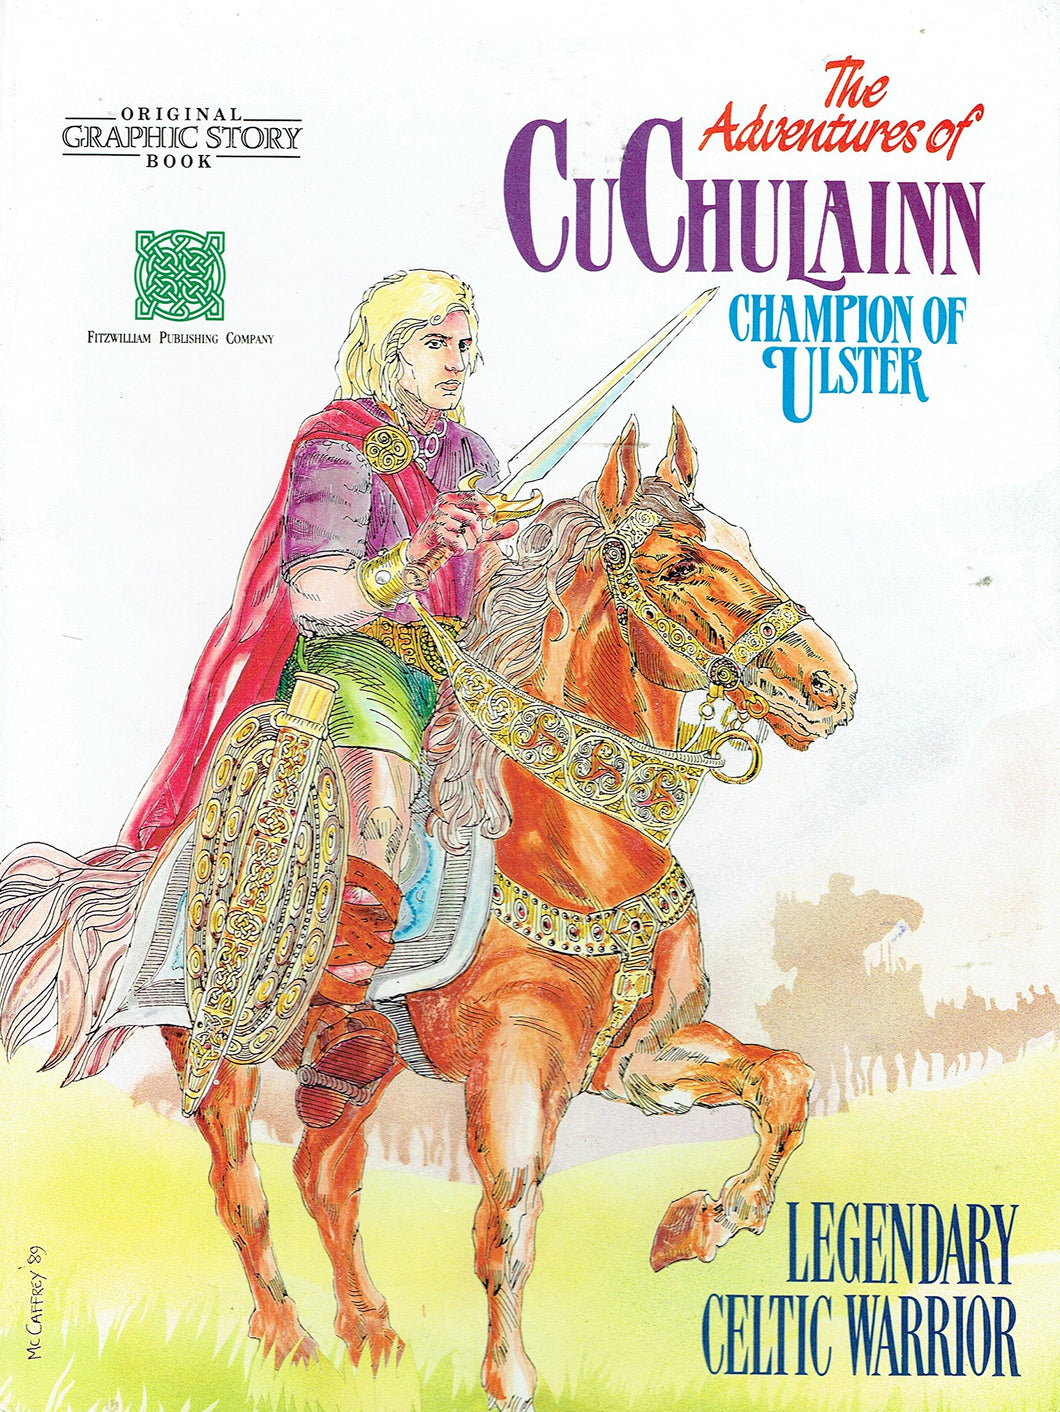 Adventures of Cuchulain, Champion of Ulster (Original graphic story book)